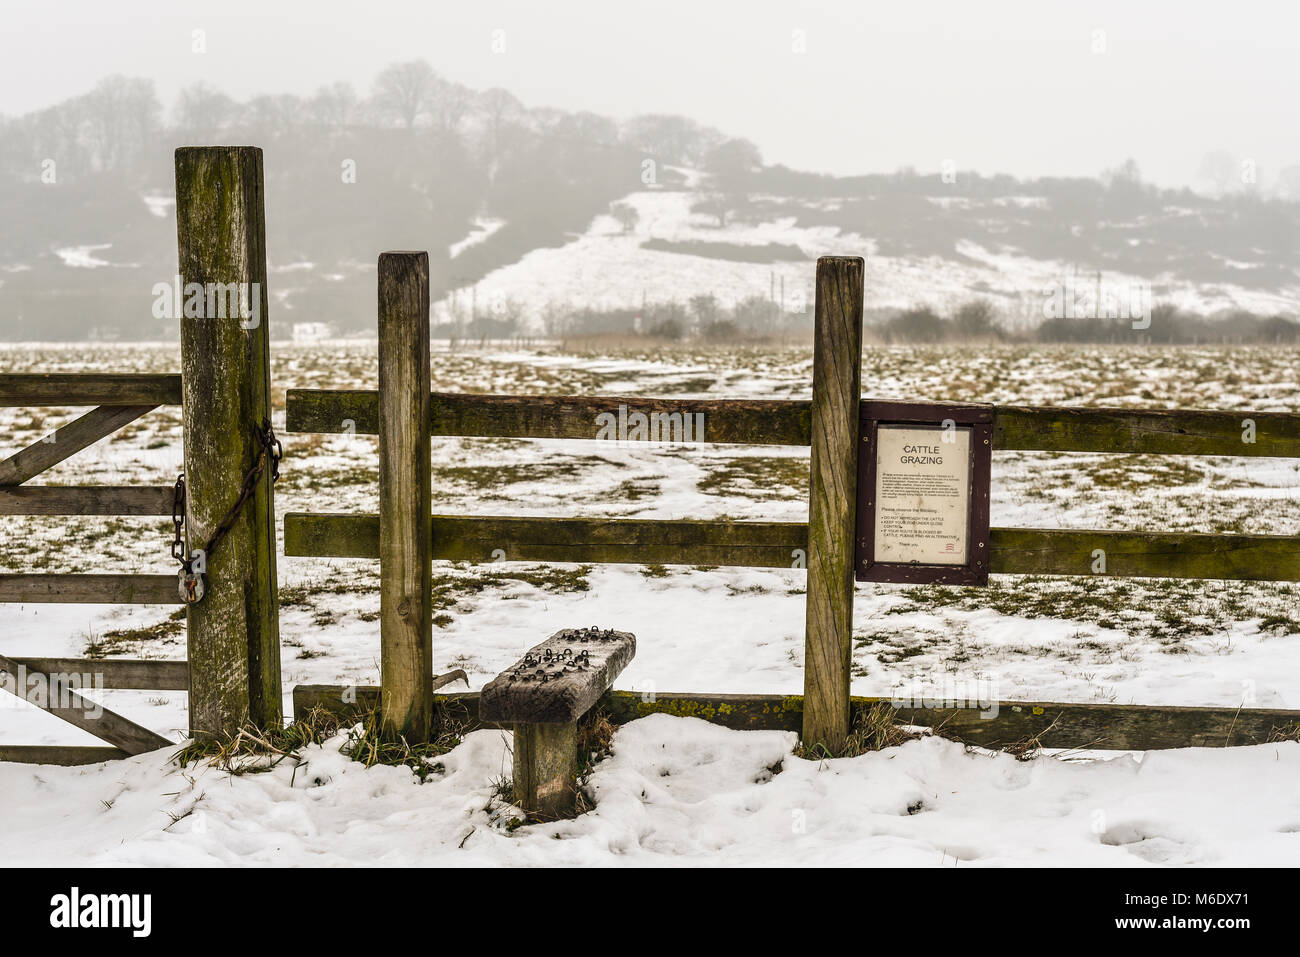 Stile Hadleigh Marsh country park and public footpath in Essex with snow on the ground from the beast from the east weather phenomenon Stock Photo